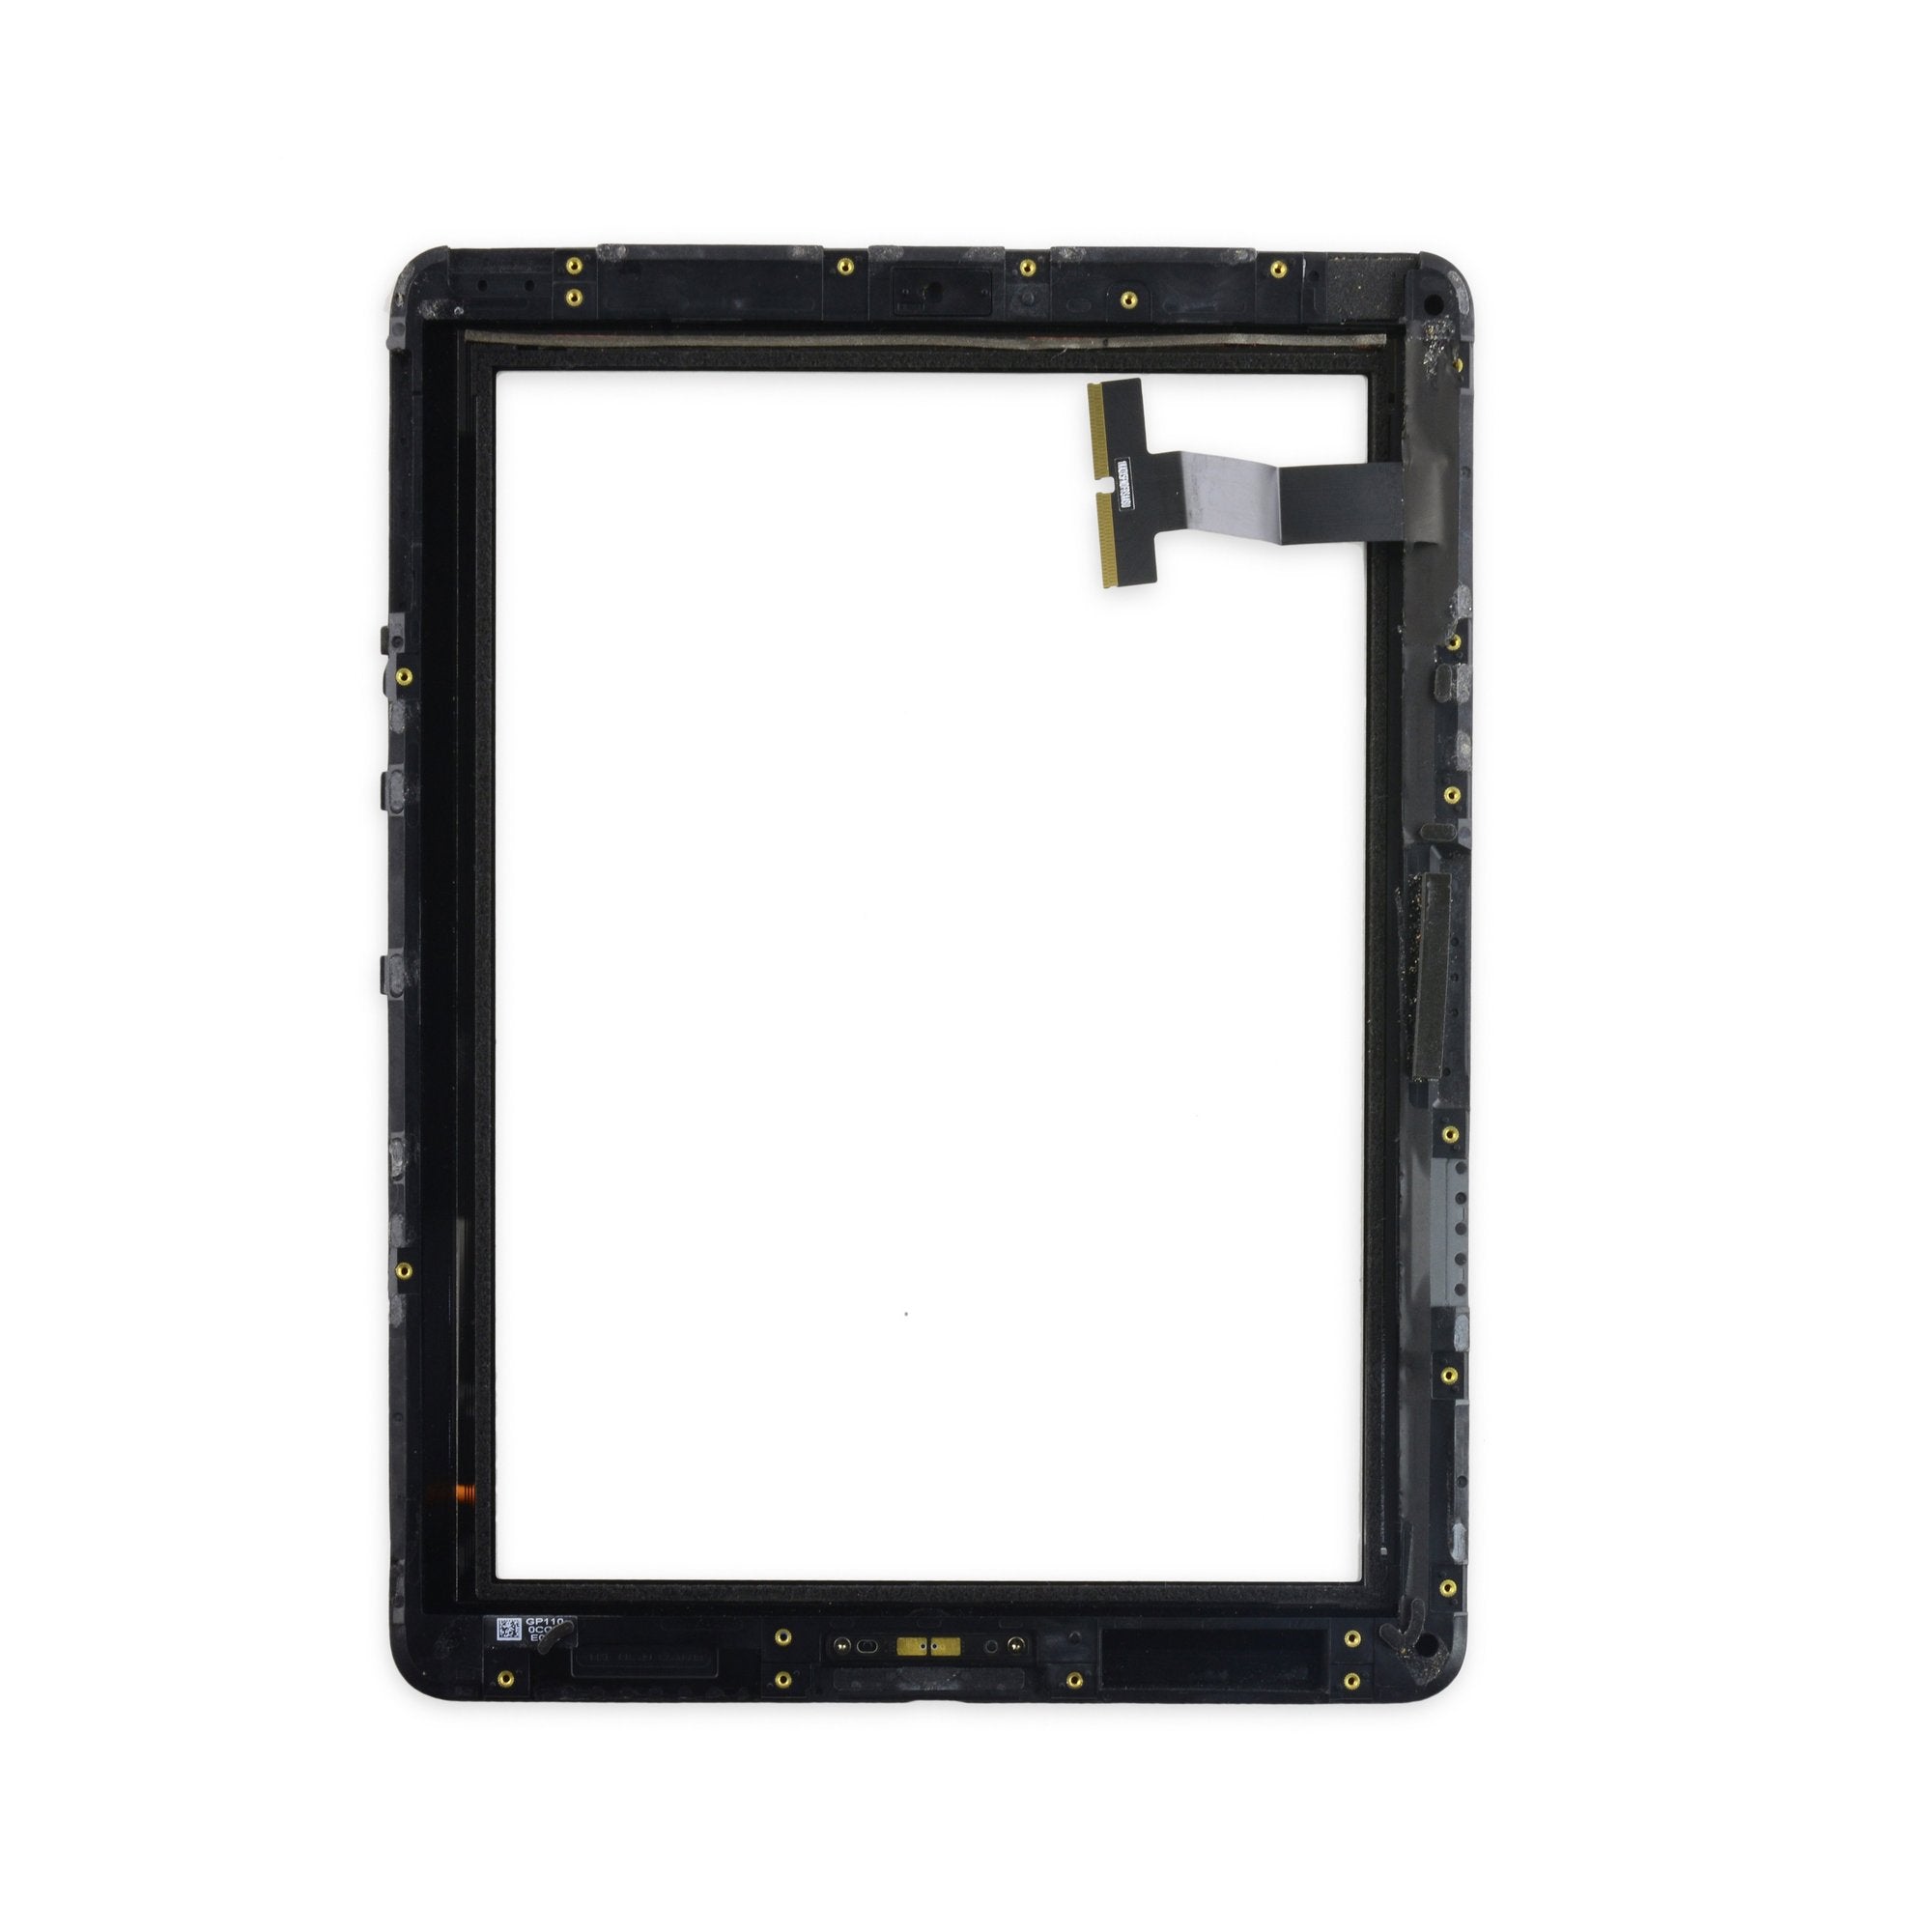 iPad Front Panel Digitizer Assembly Used, B-Stock